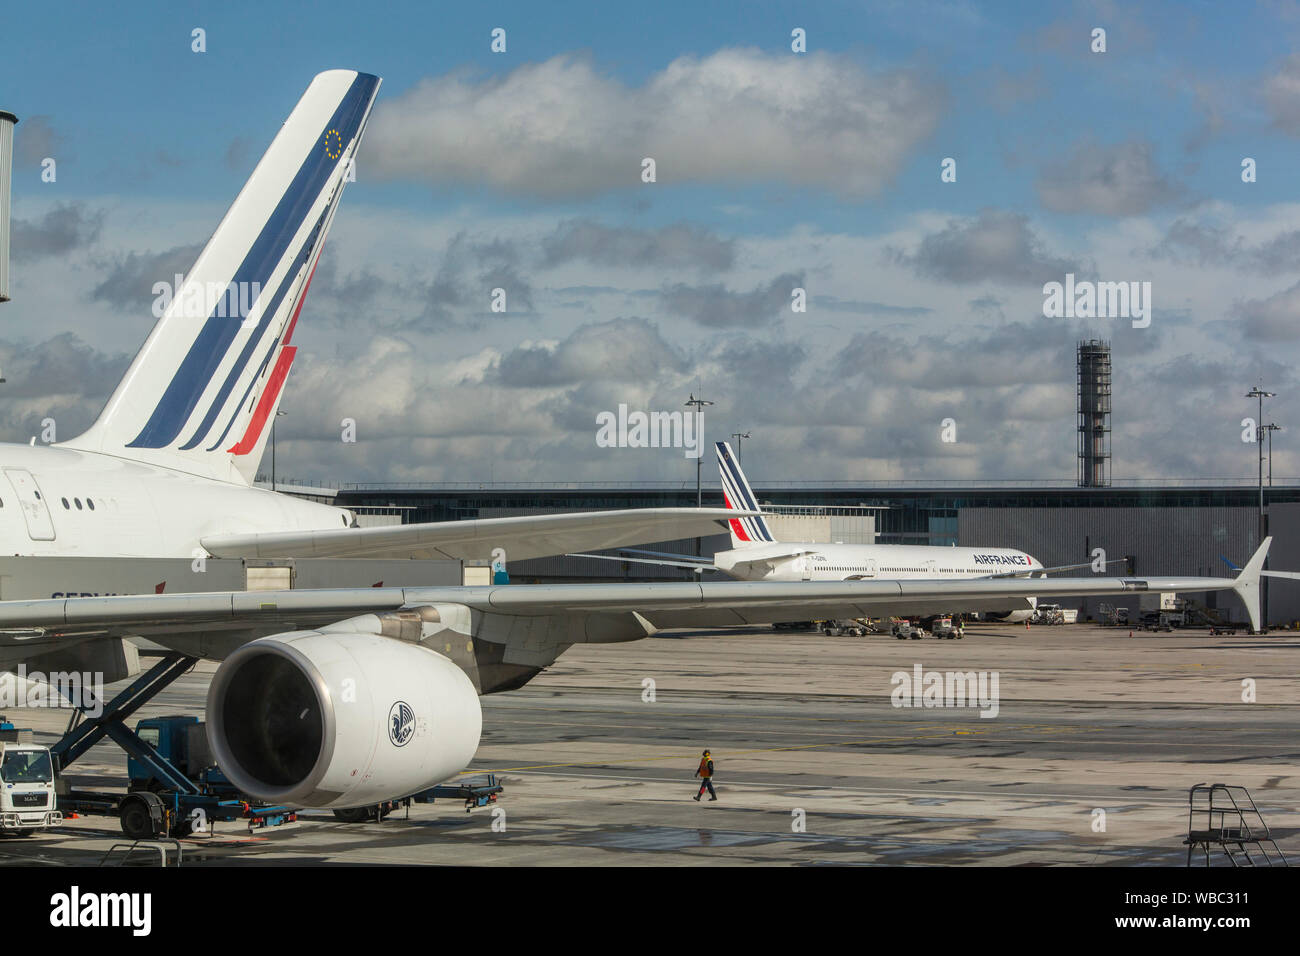 AIR FRANCE PLANES AT ROISSY AIRPORT Stock Photo